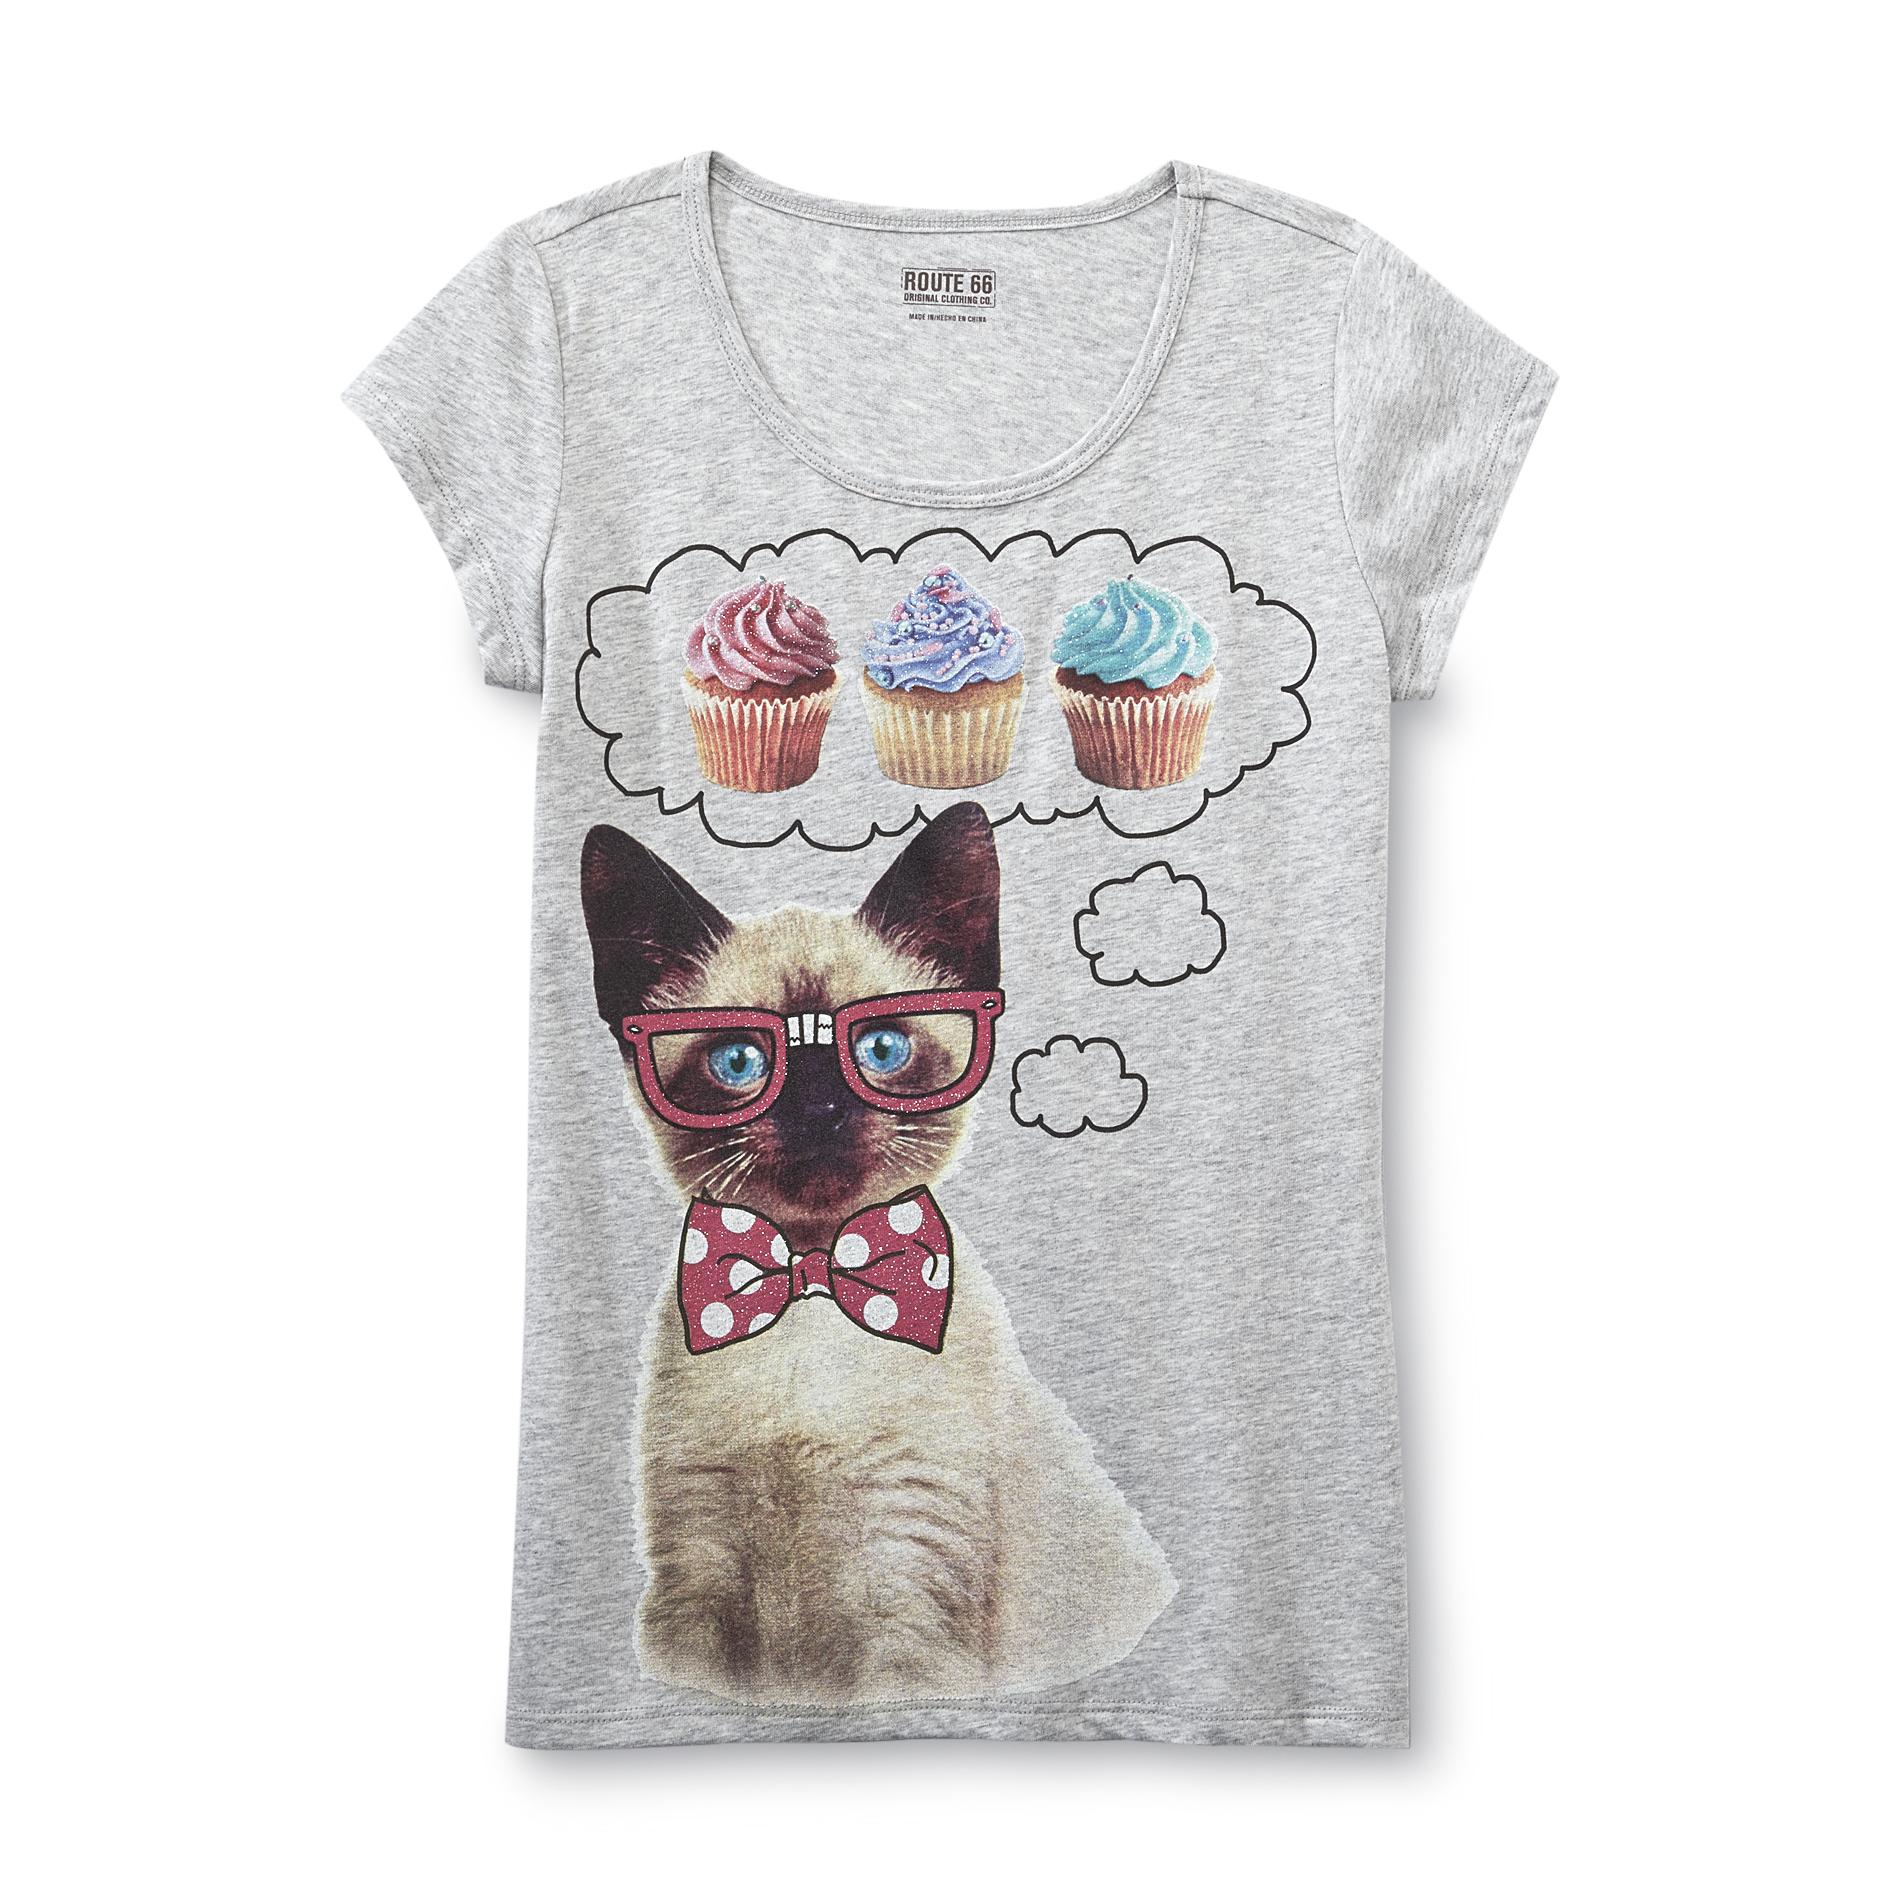 Route 66 Girl's Graphic T-Shirt - Cat & Cupcakes